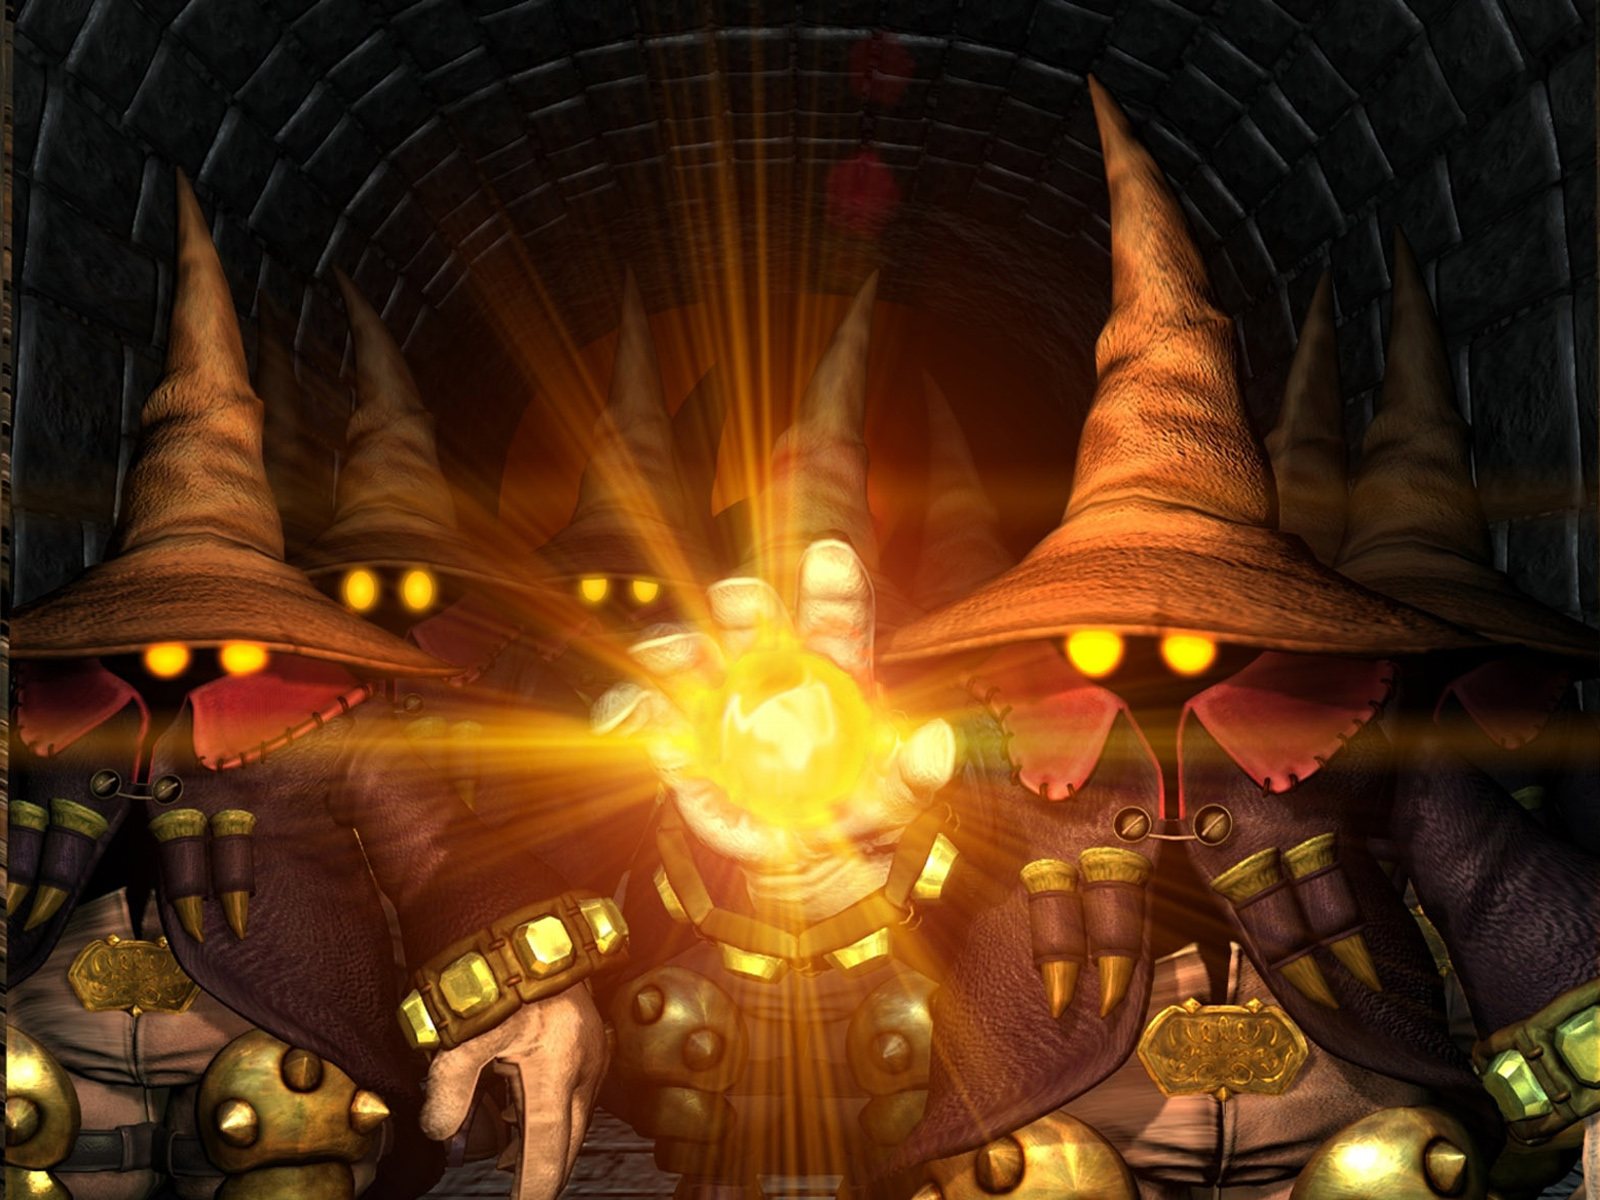 A magical sorcerer from Final Fantasy IX, casting spells in a vibrant video game world.